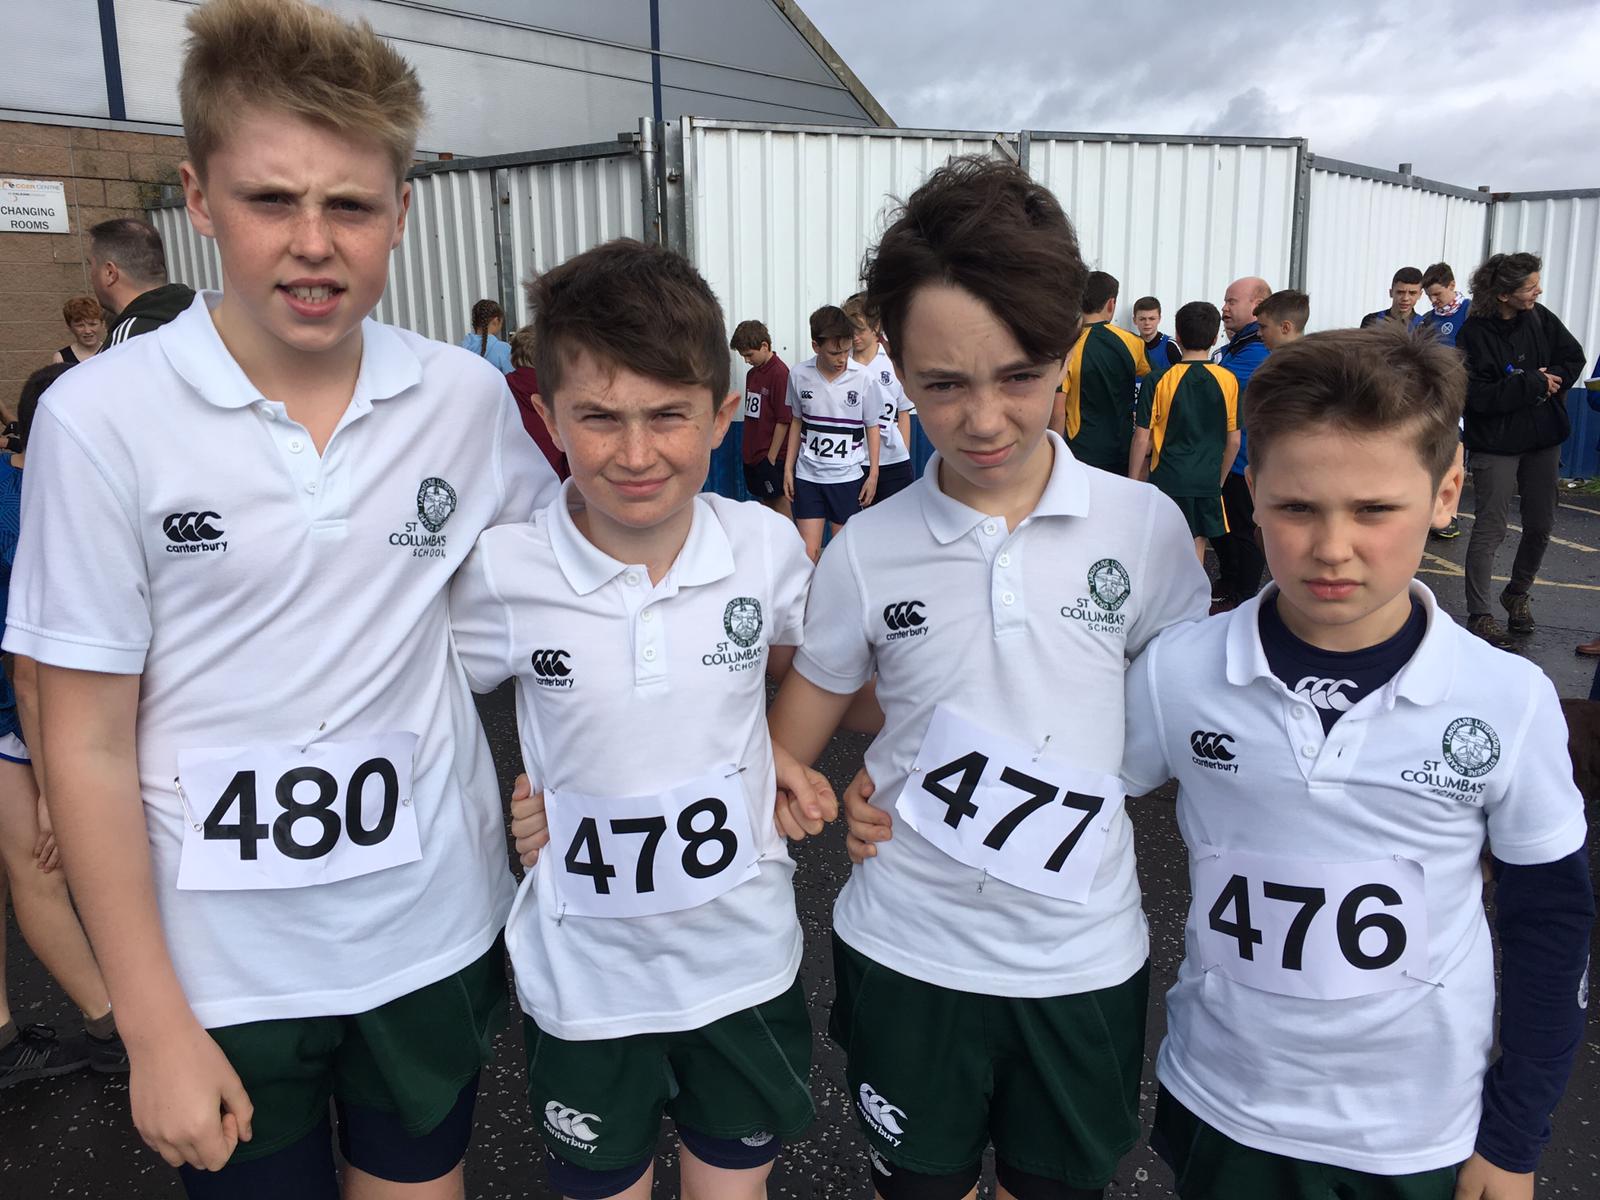 St Columba's Pupils Compete in SSAA Road Race